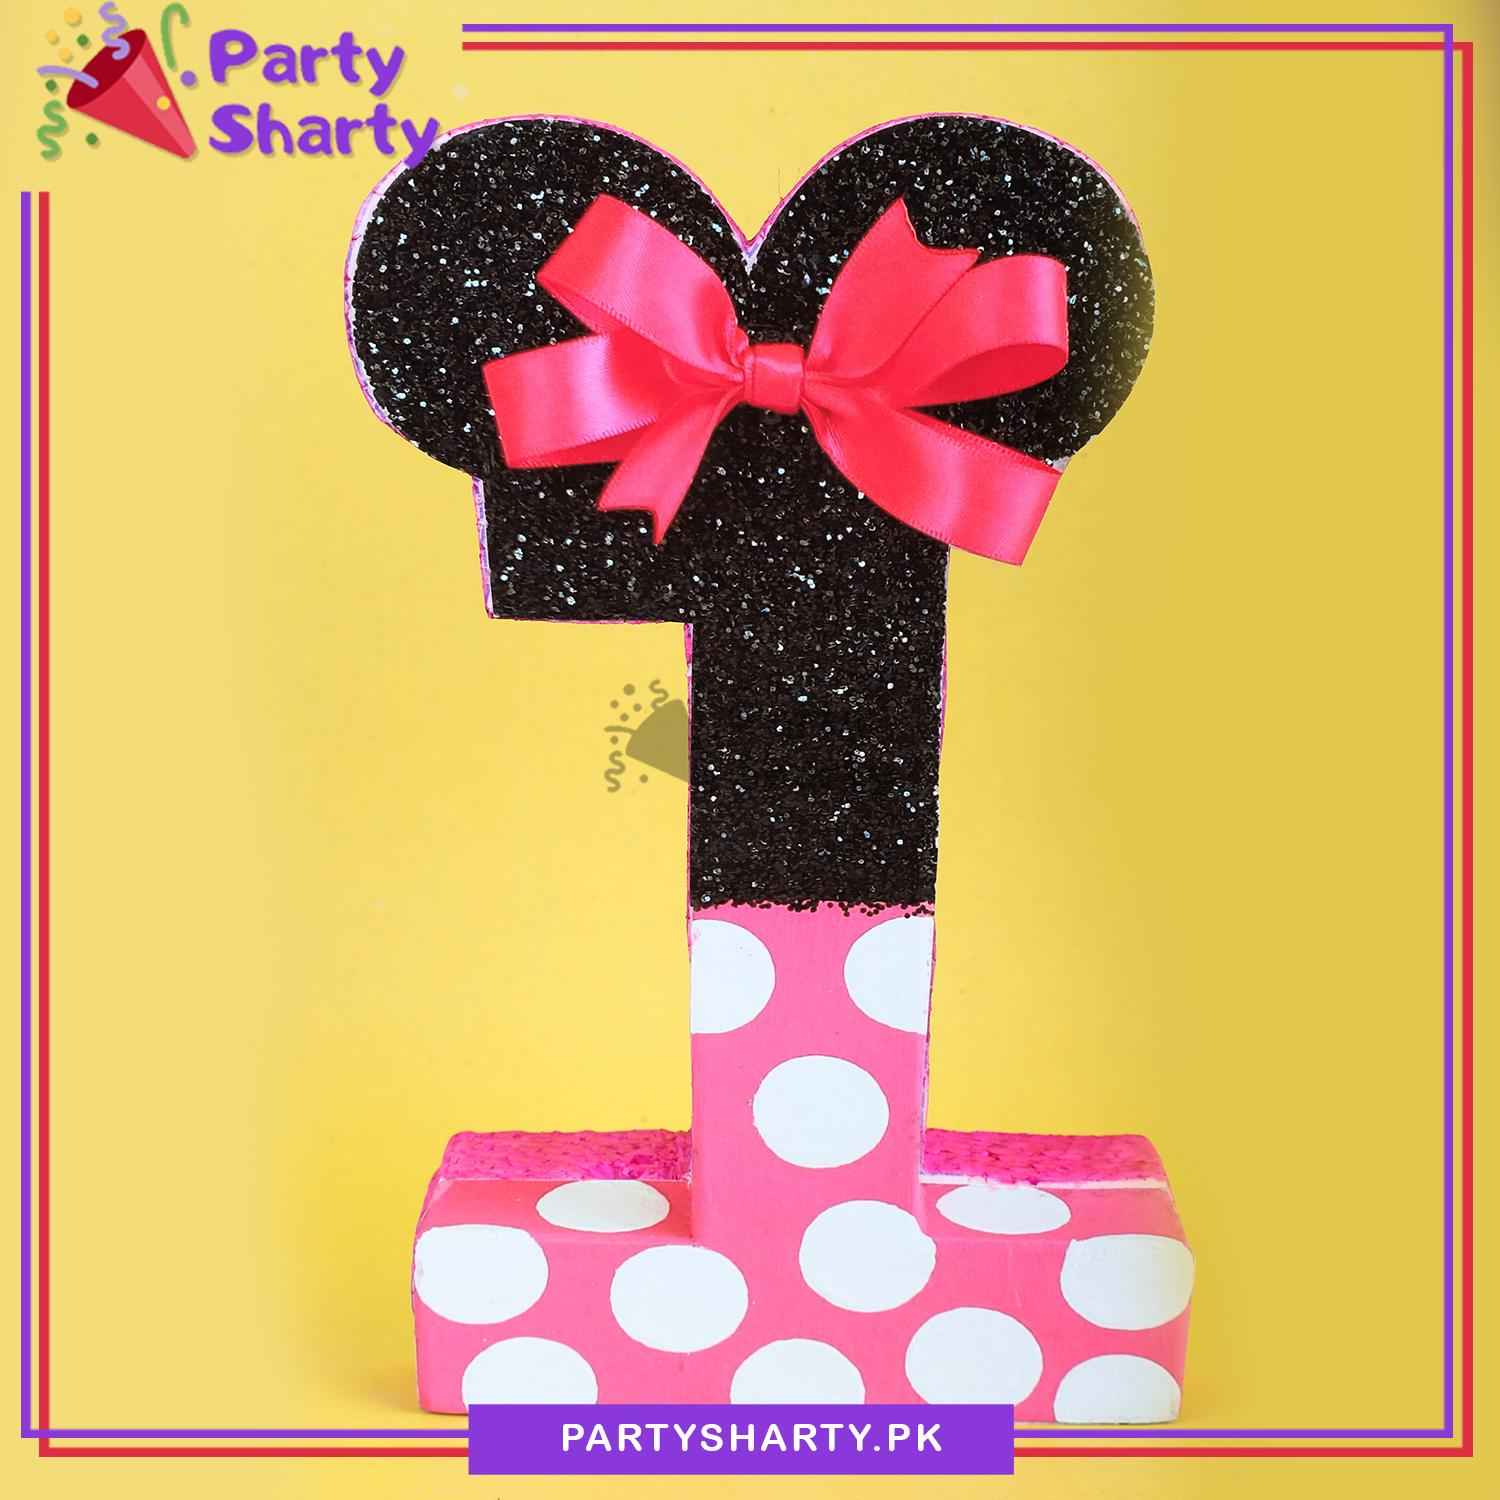 Numeric 1 Thermocol Standee For Minnie Mouse Theme Based First Birthday Celebration and Party Decoration